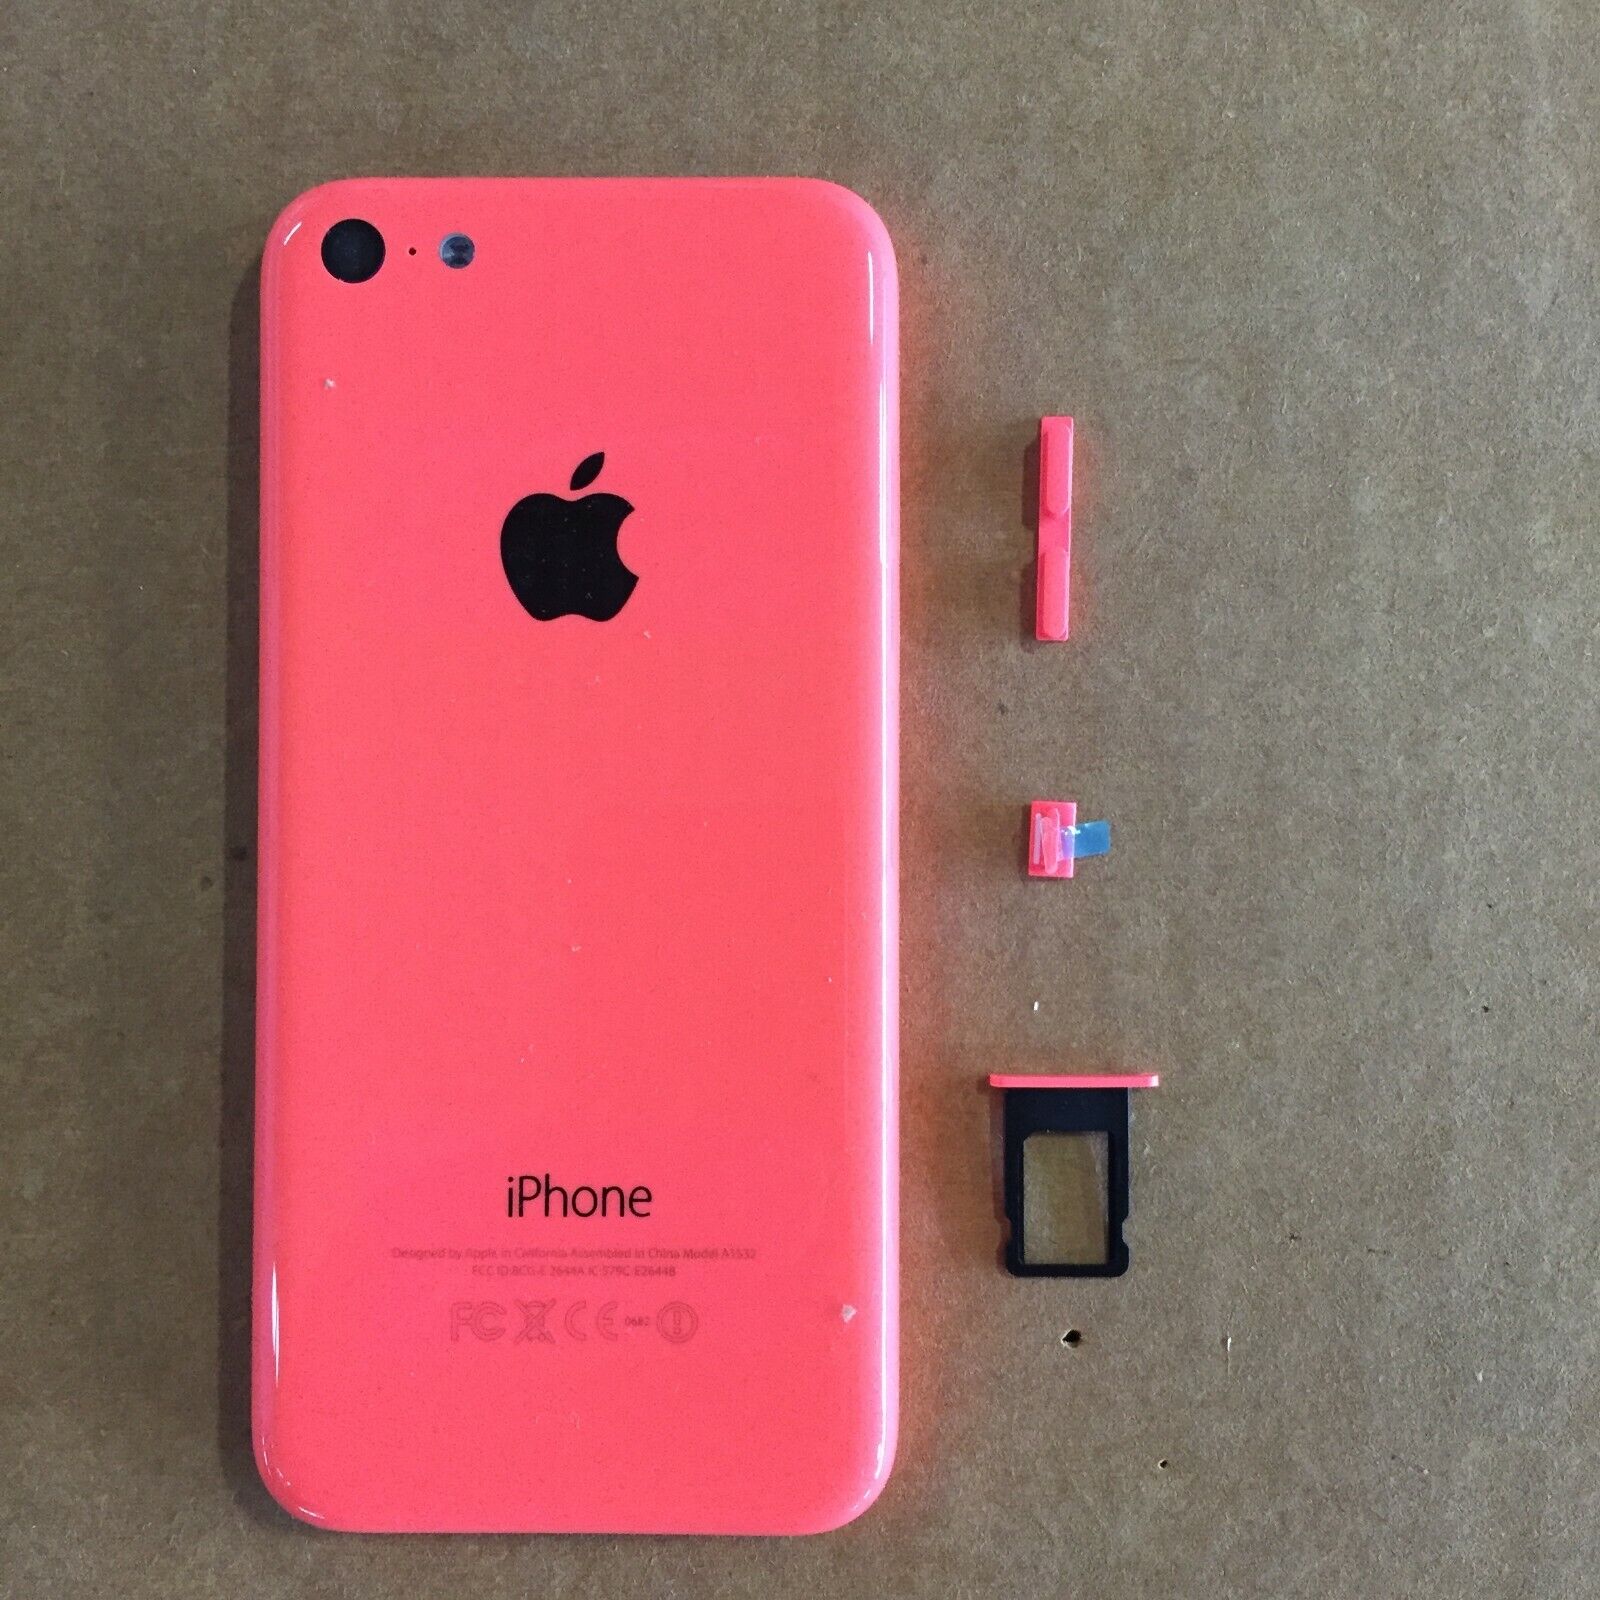 LOT OF 24 Apple Iphone 5c Pink New With Small Parts Only | eBay